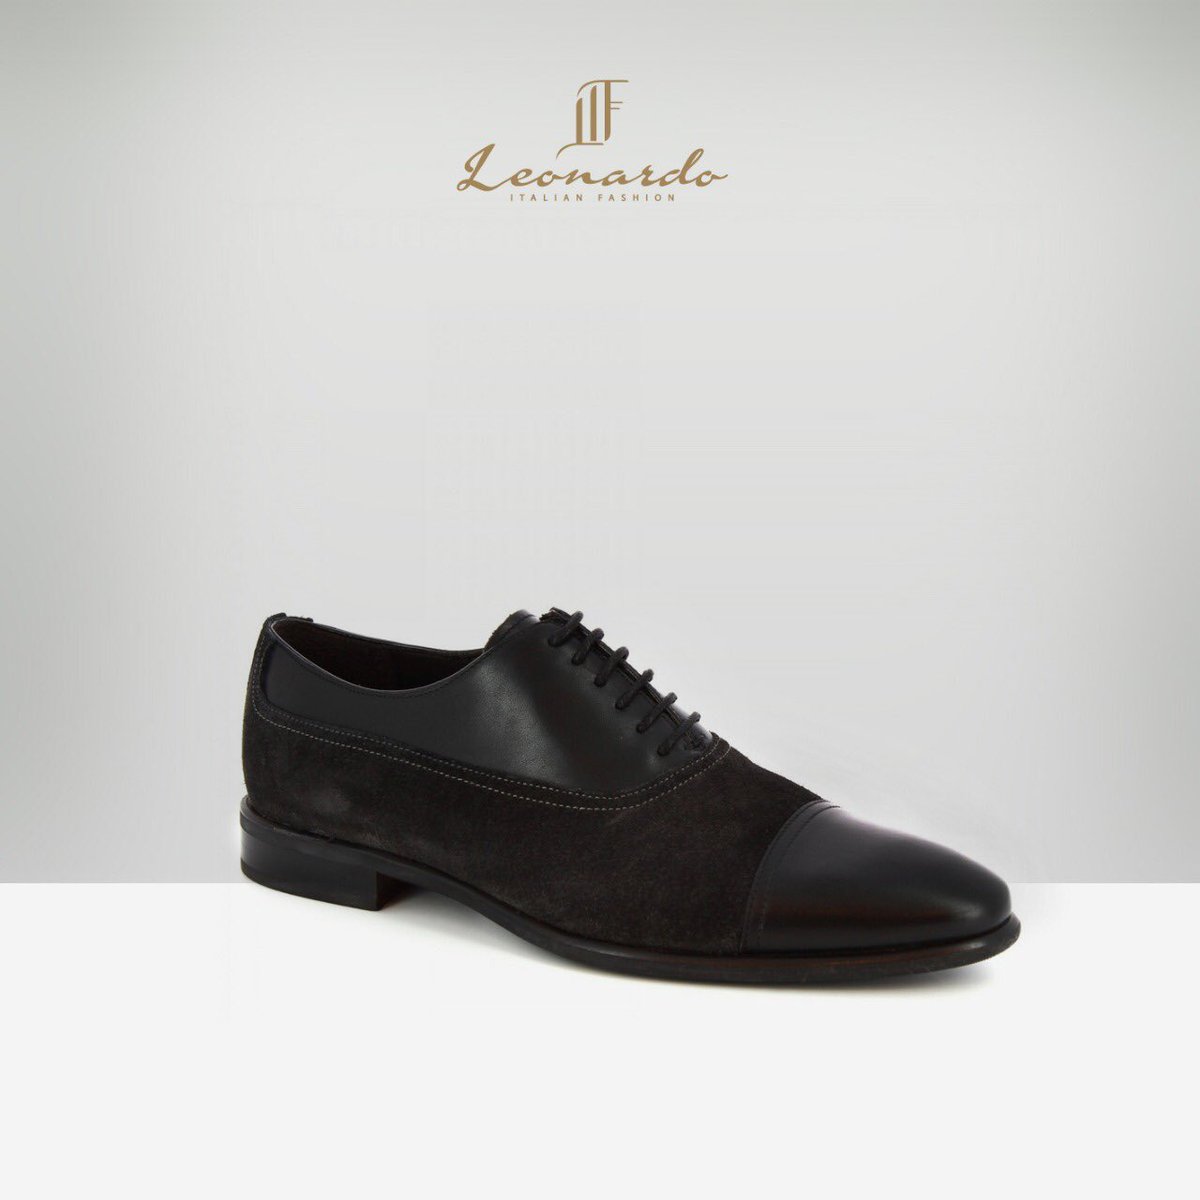 Leonardo handmade oxford shoes in calf and suede, a daring fashionable style for men
.  
#calfleather #leather #suede #leathershoesmen #mensfashion #handmadeleather #bespoke #bespokeshoes #shoesstyle #shoestore #shoesoftheday #onlineshop #rome #florence #usa🇺🇸